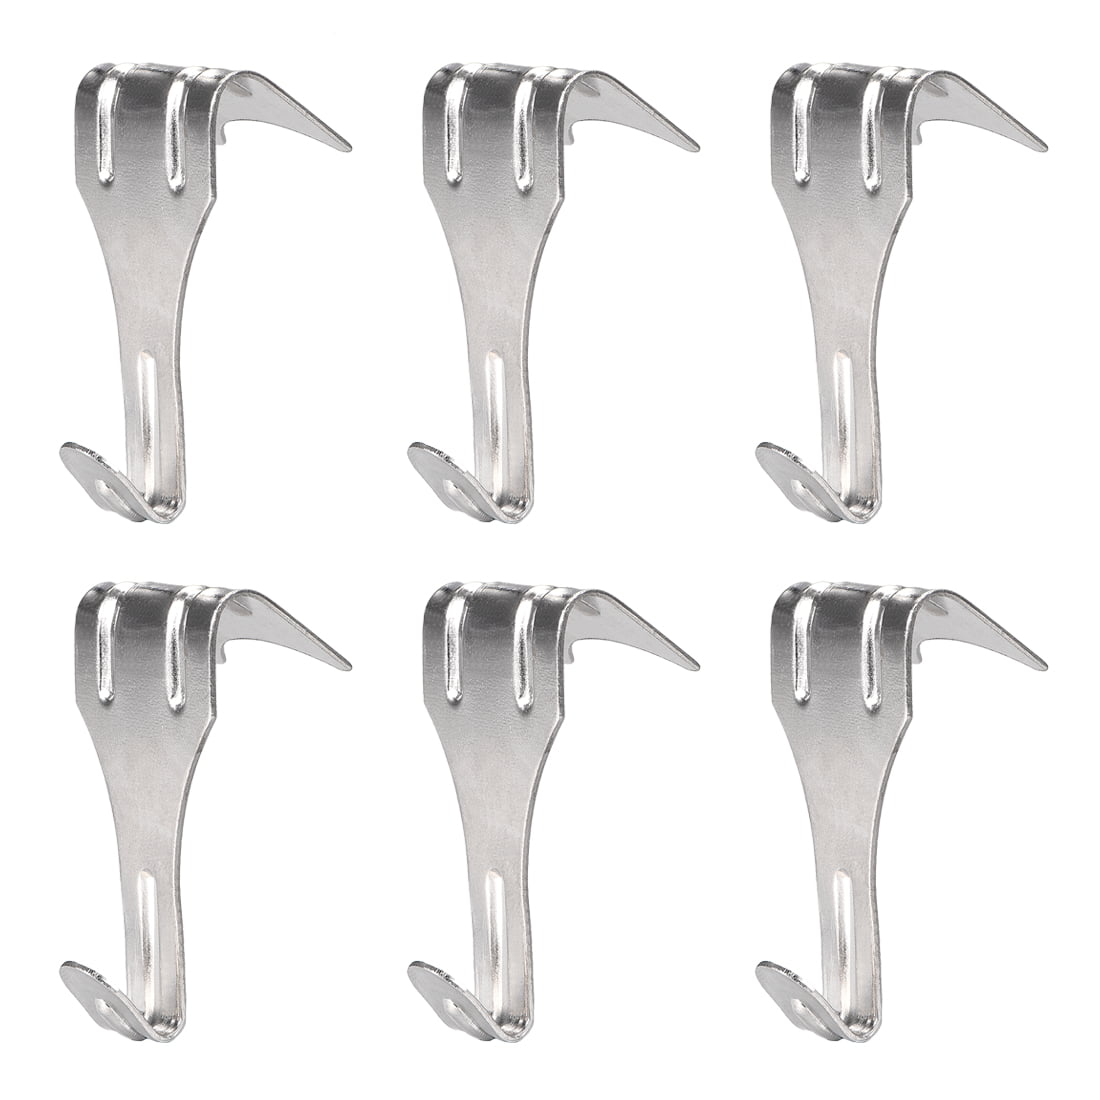 Solid Moulding Picture Hooks Rail Hanging Hook Galvanized 54mmx29mm Silver 6pcs 